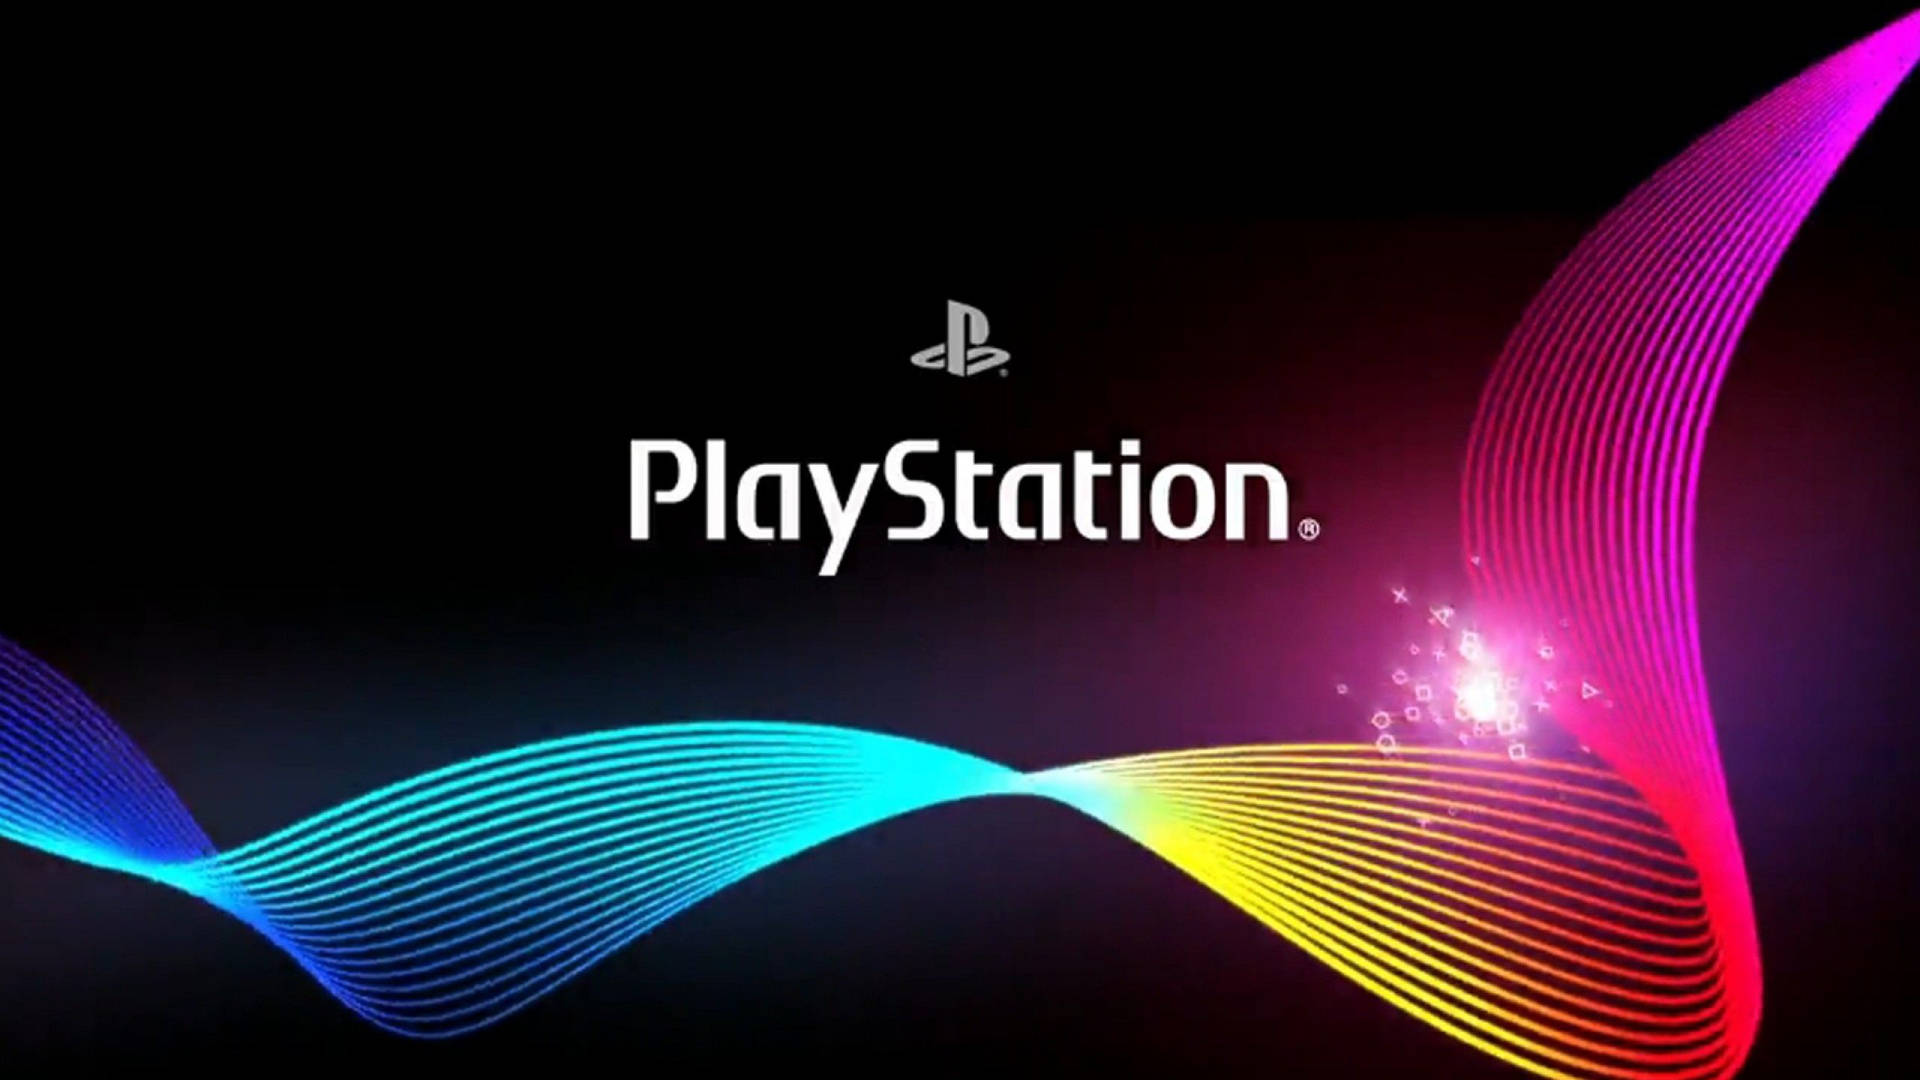 Playstation Colored Neon Waves Background